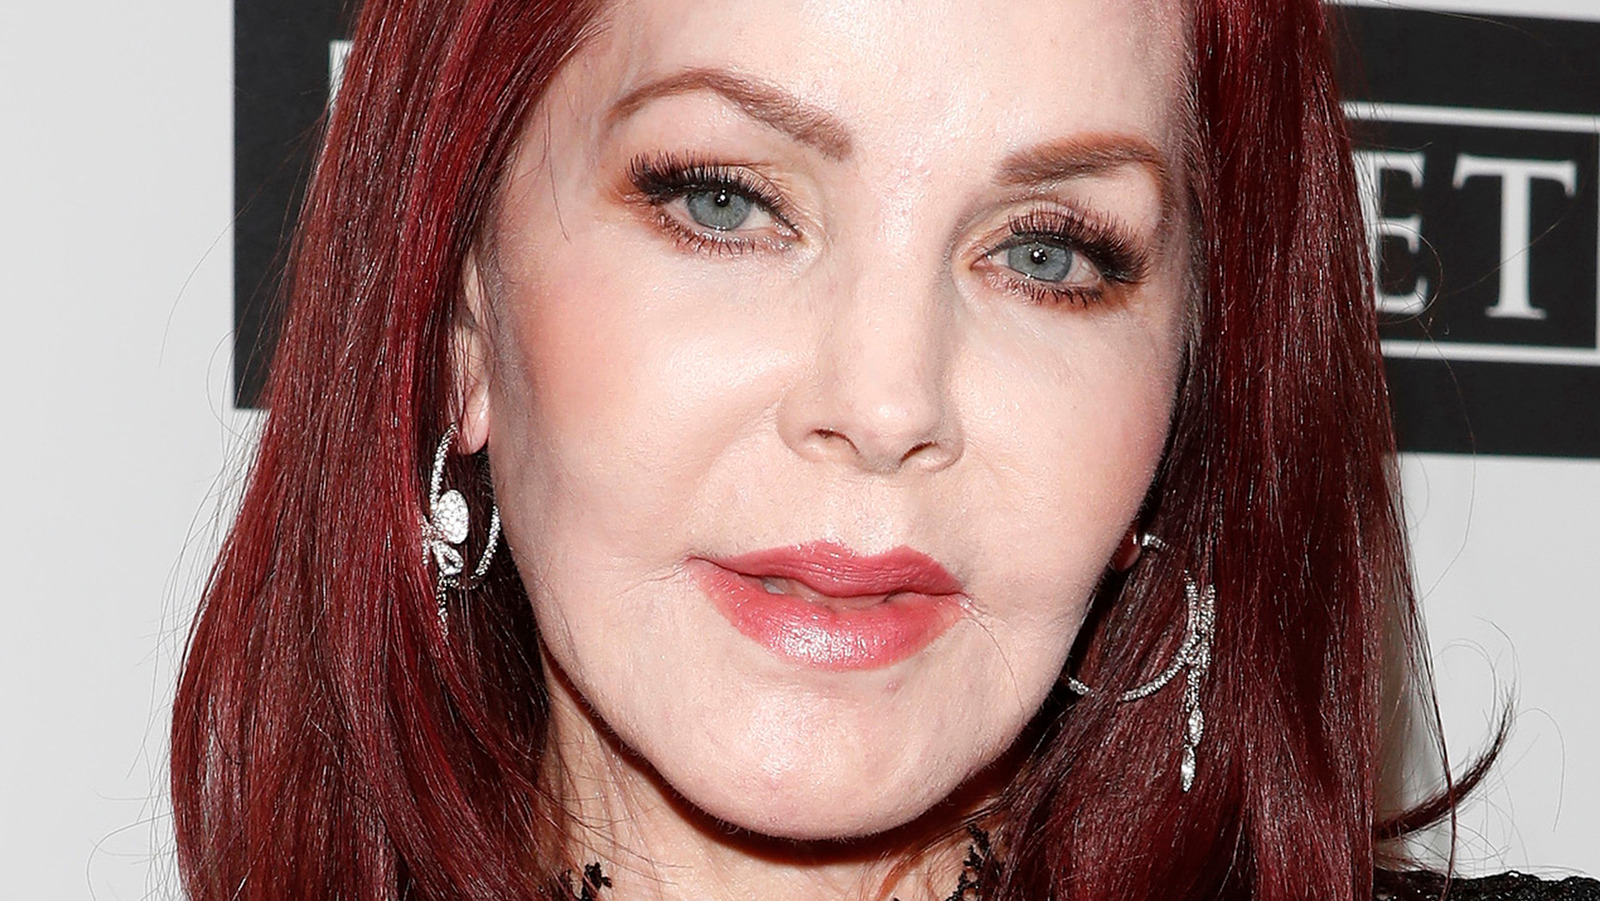 Here's who Priscilla Presley dated after her split with Elvis